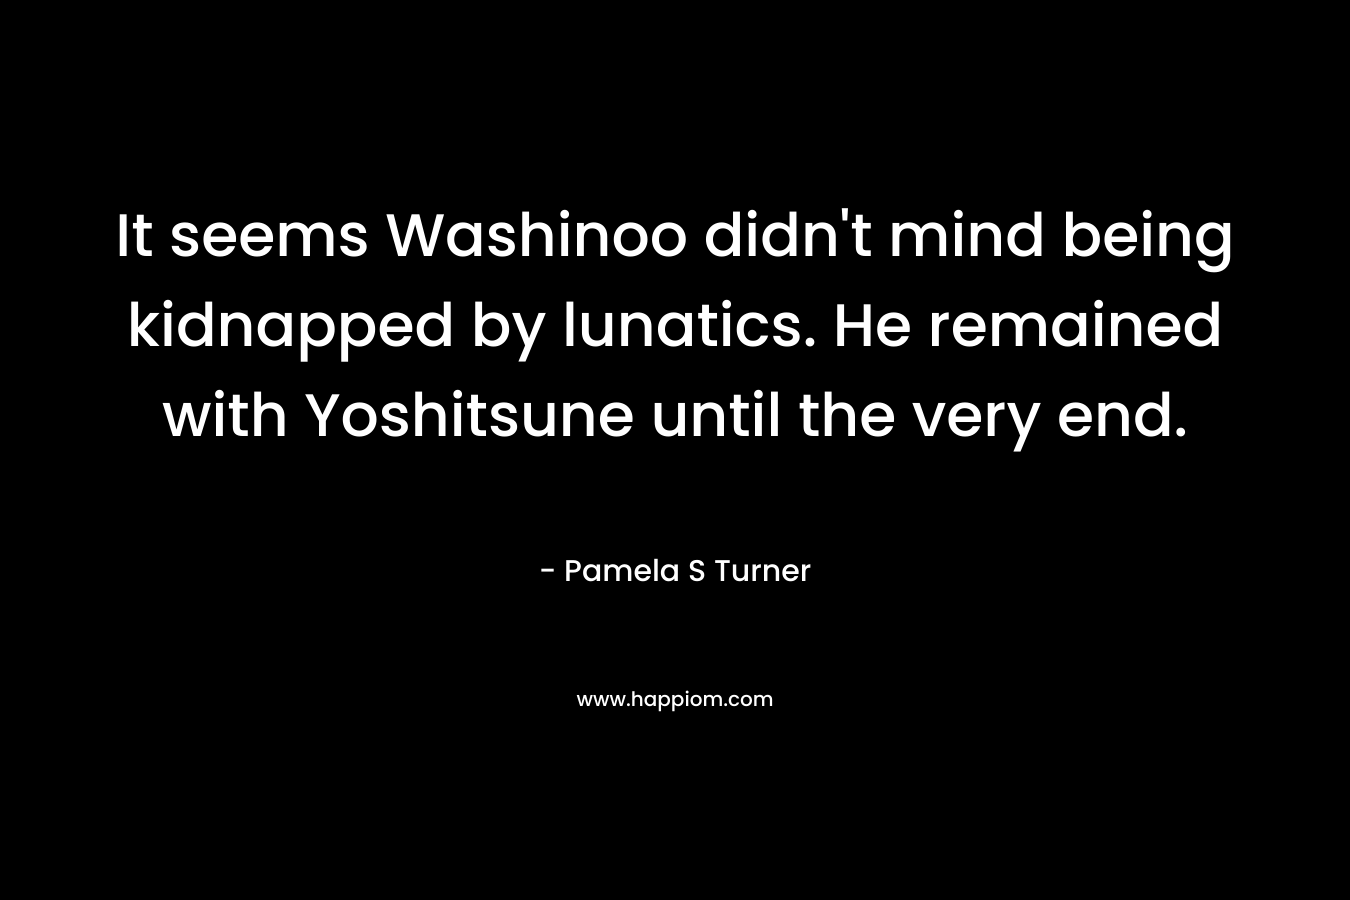 It seems Washinoo didn't mind being kidnapped by lunatics. He remained with Yoshitsune until the very end.